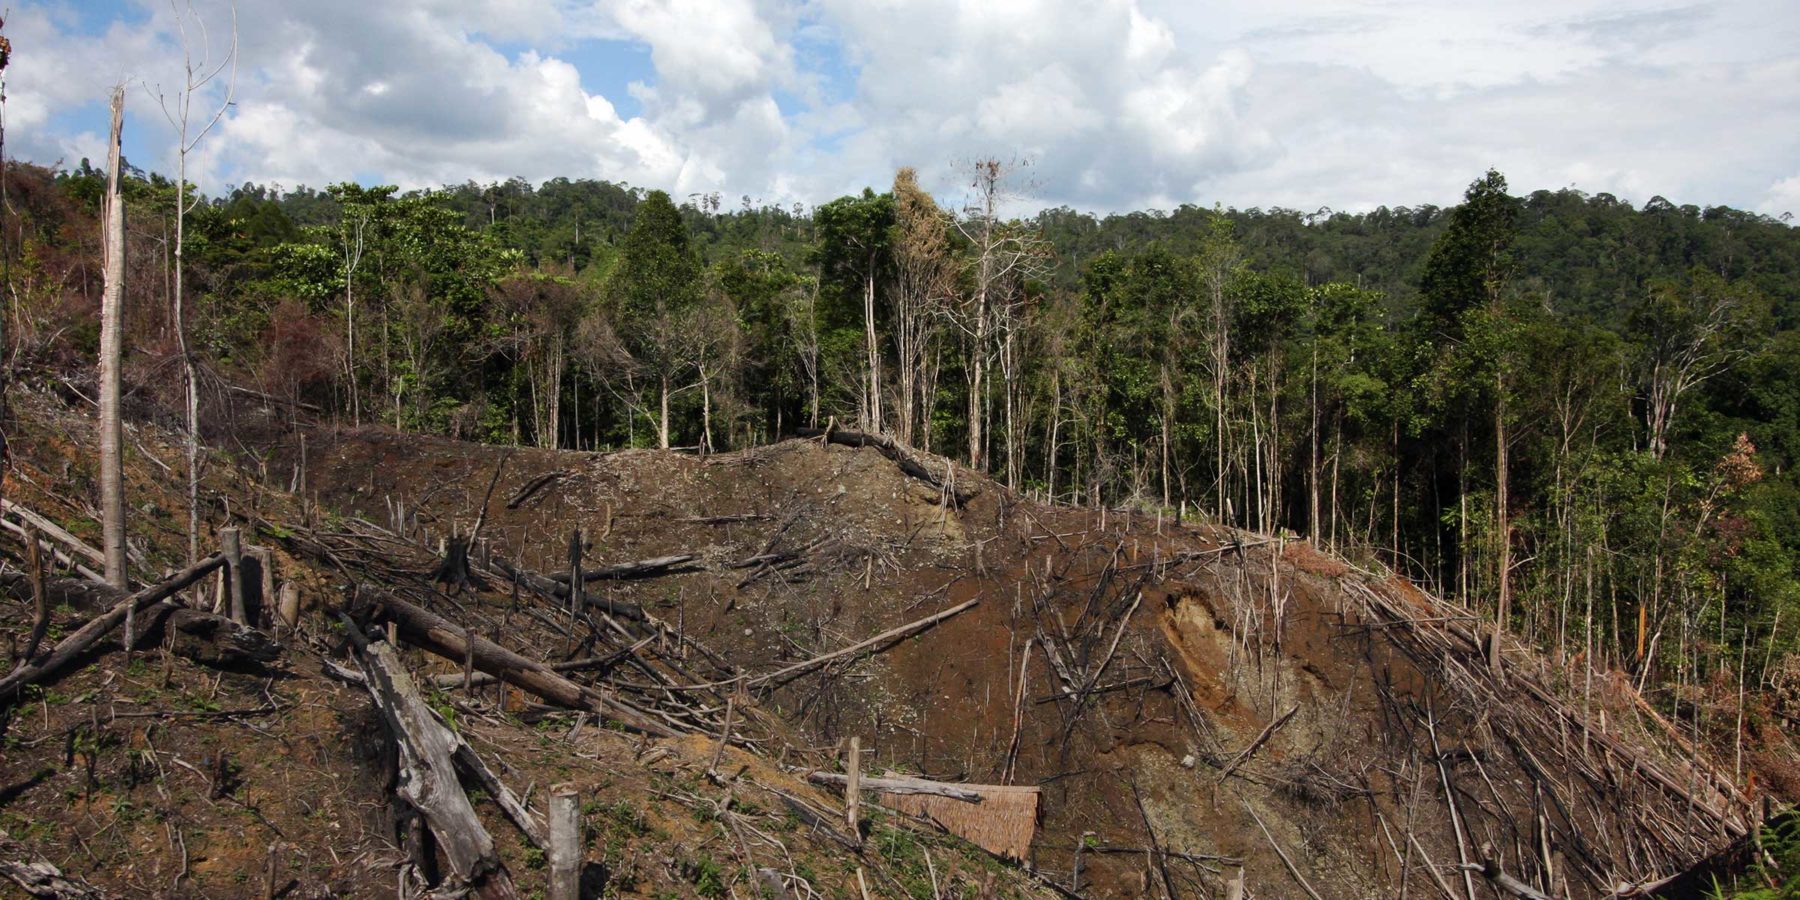 This tropical rainforest in Aceh province on the northern tip of Sumatra island Indonesia is home to diminishing numbers of tigers, orangutan, elephants and rhinoceroses. This August 2010 photo shows a recently cleared portion of rainforest in rugged terrain being converted to a vegetable garden. Burnt logs are still lying where they fell after being chopped down. The loss of rainforest cover will accelerate soil erosion further compounding damage to the fragile habitat.